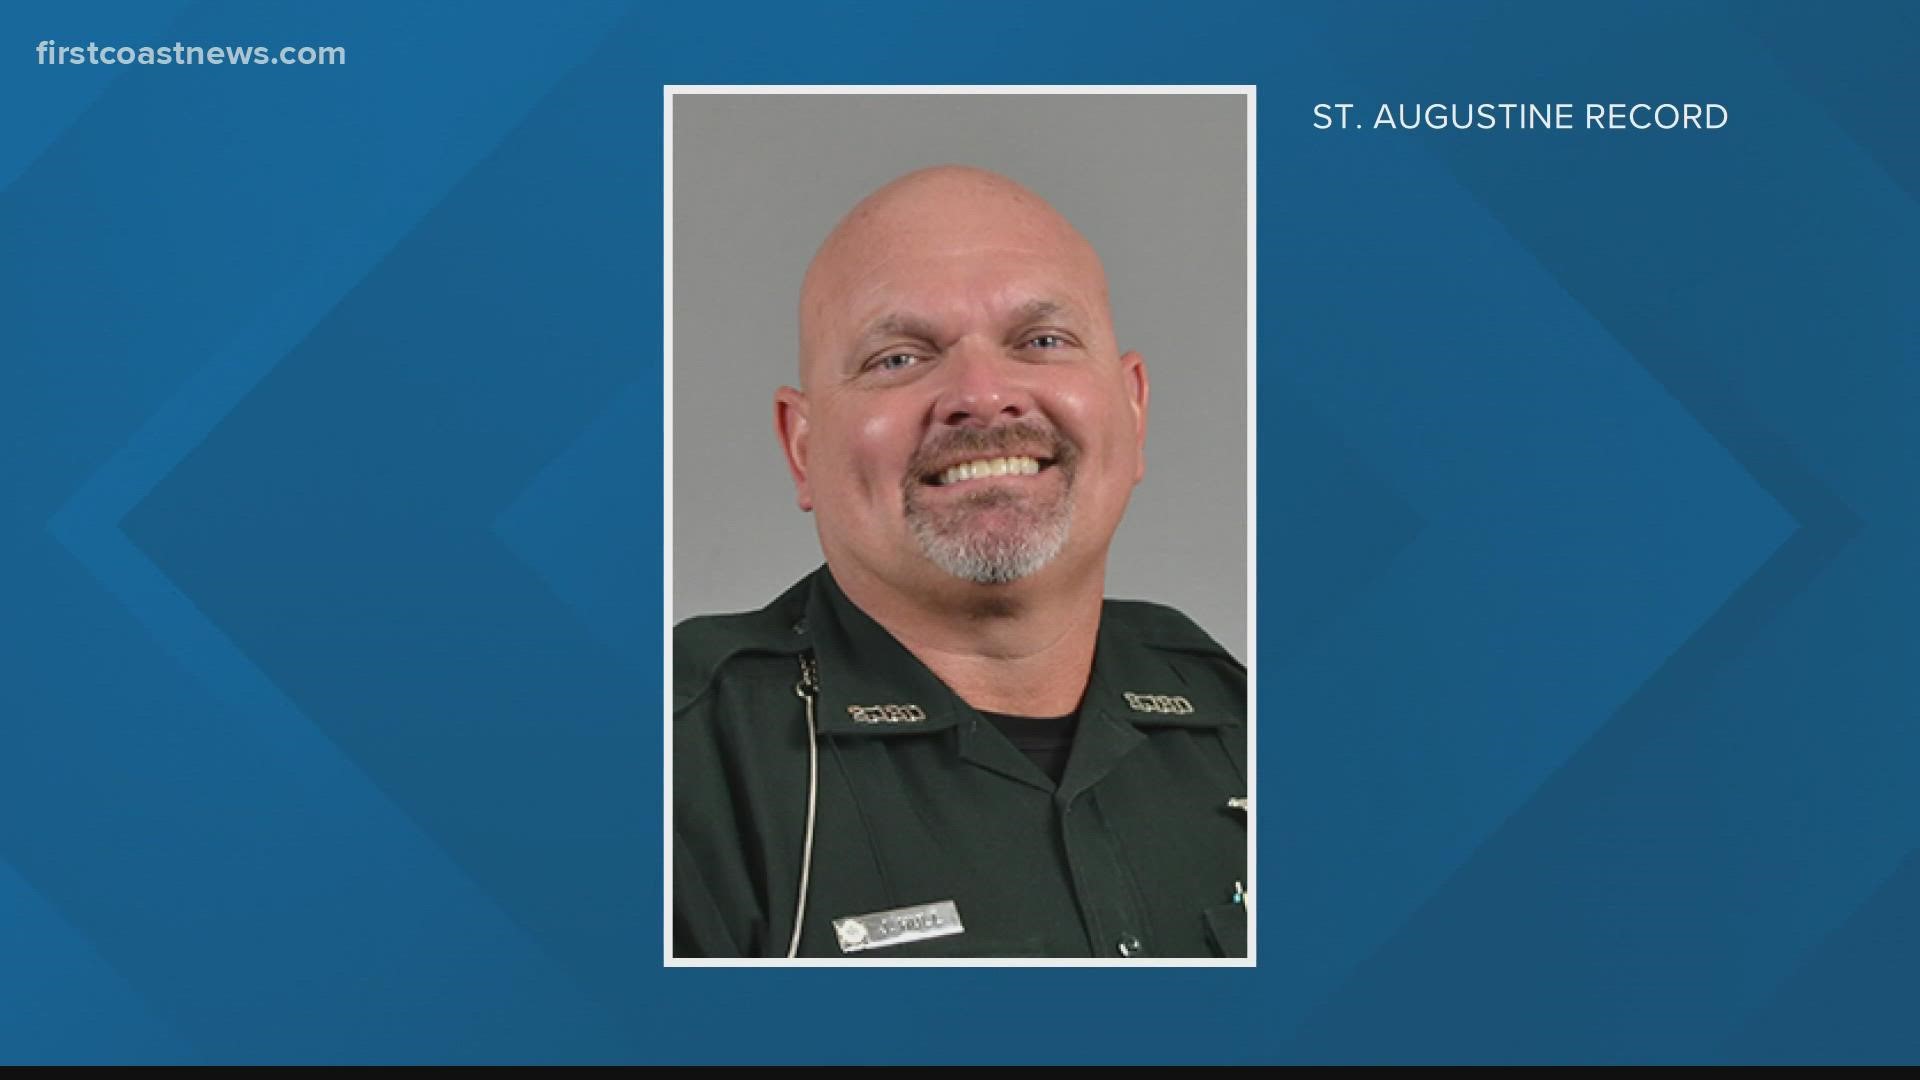 Jody Hull was with the agency for four years and most recently served as the Youth Resource Deputy at St. Augustine High School.